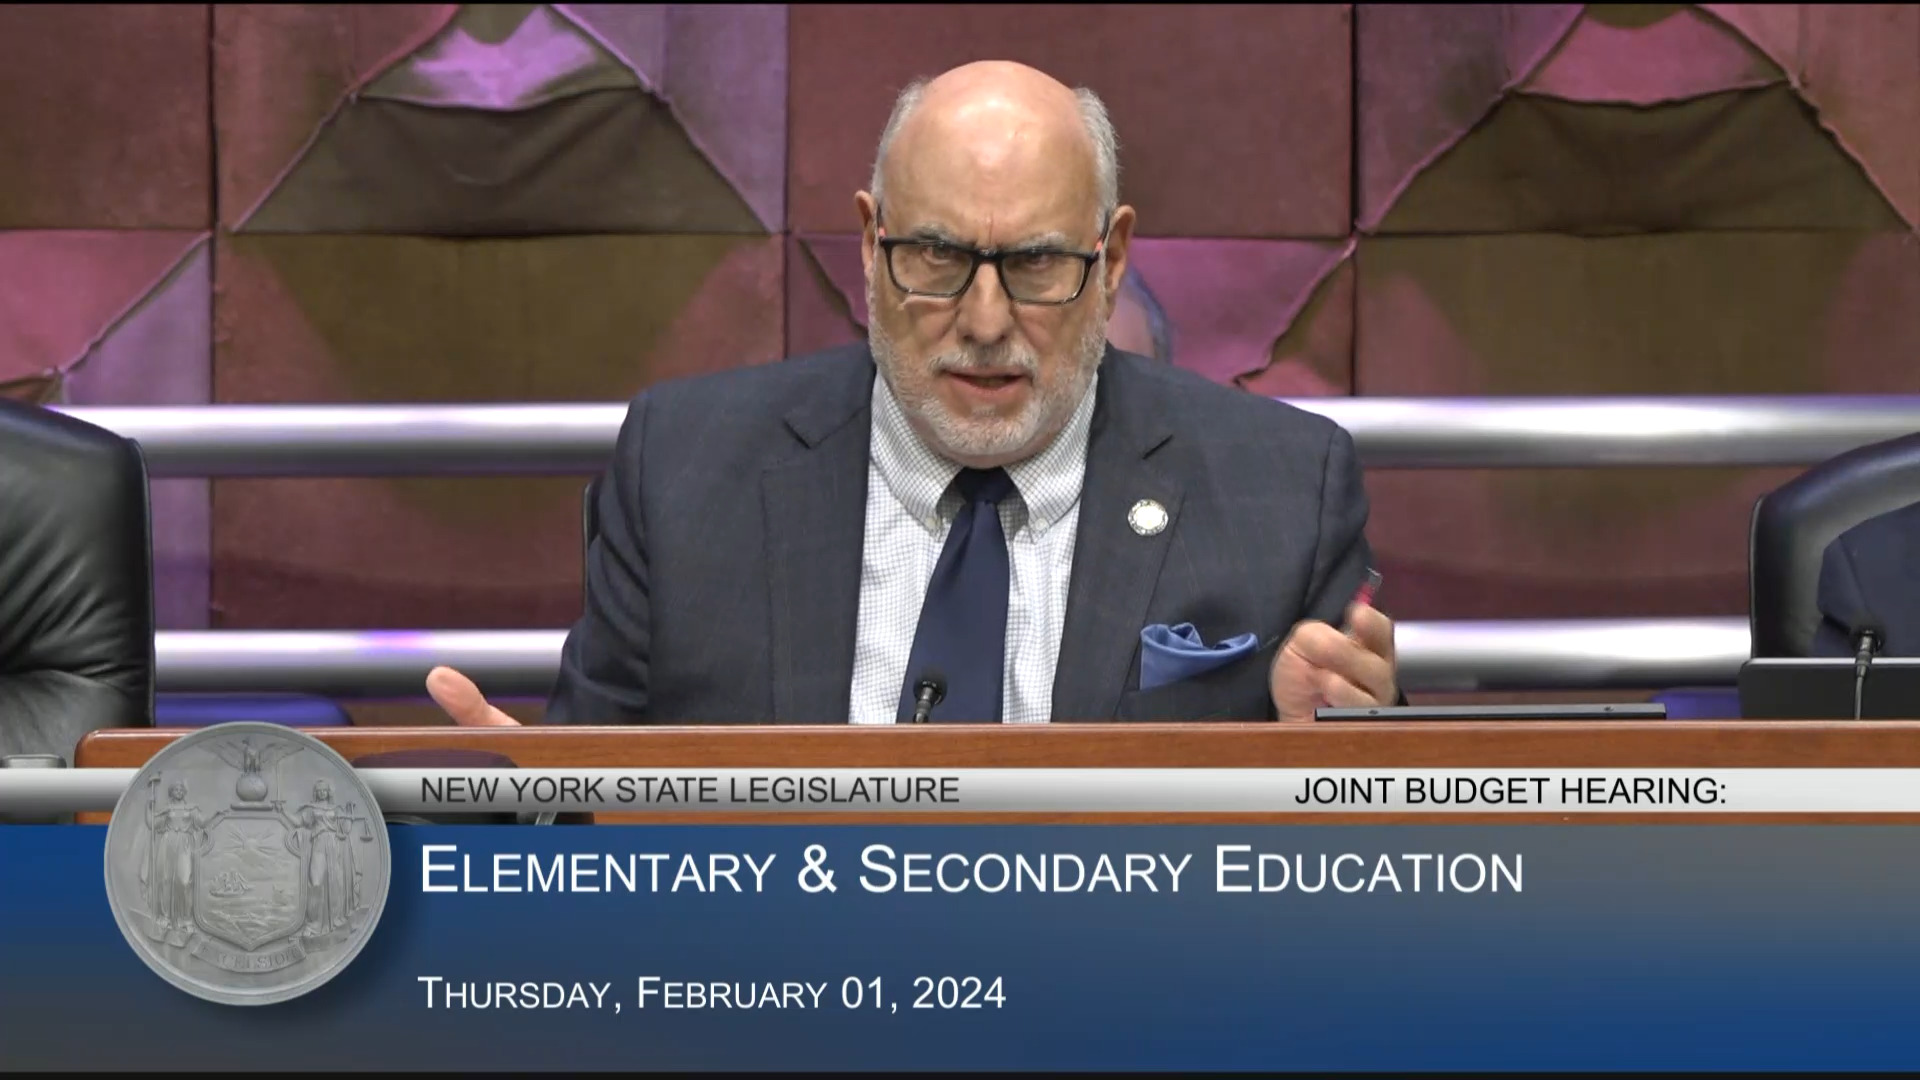 UFT President Testifies During Budget Hearing on Elementary and Secondary Education